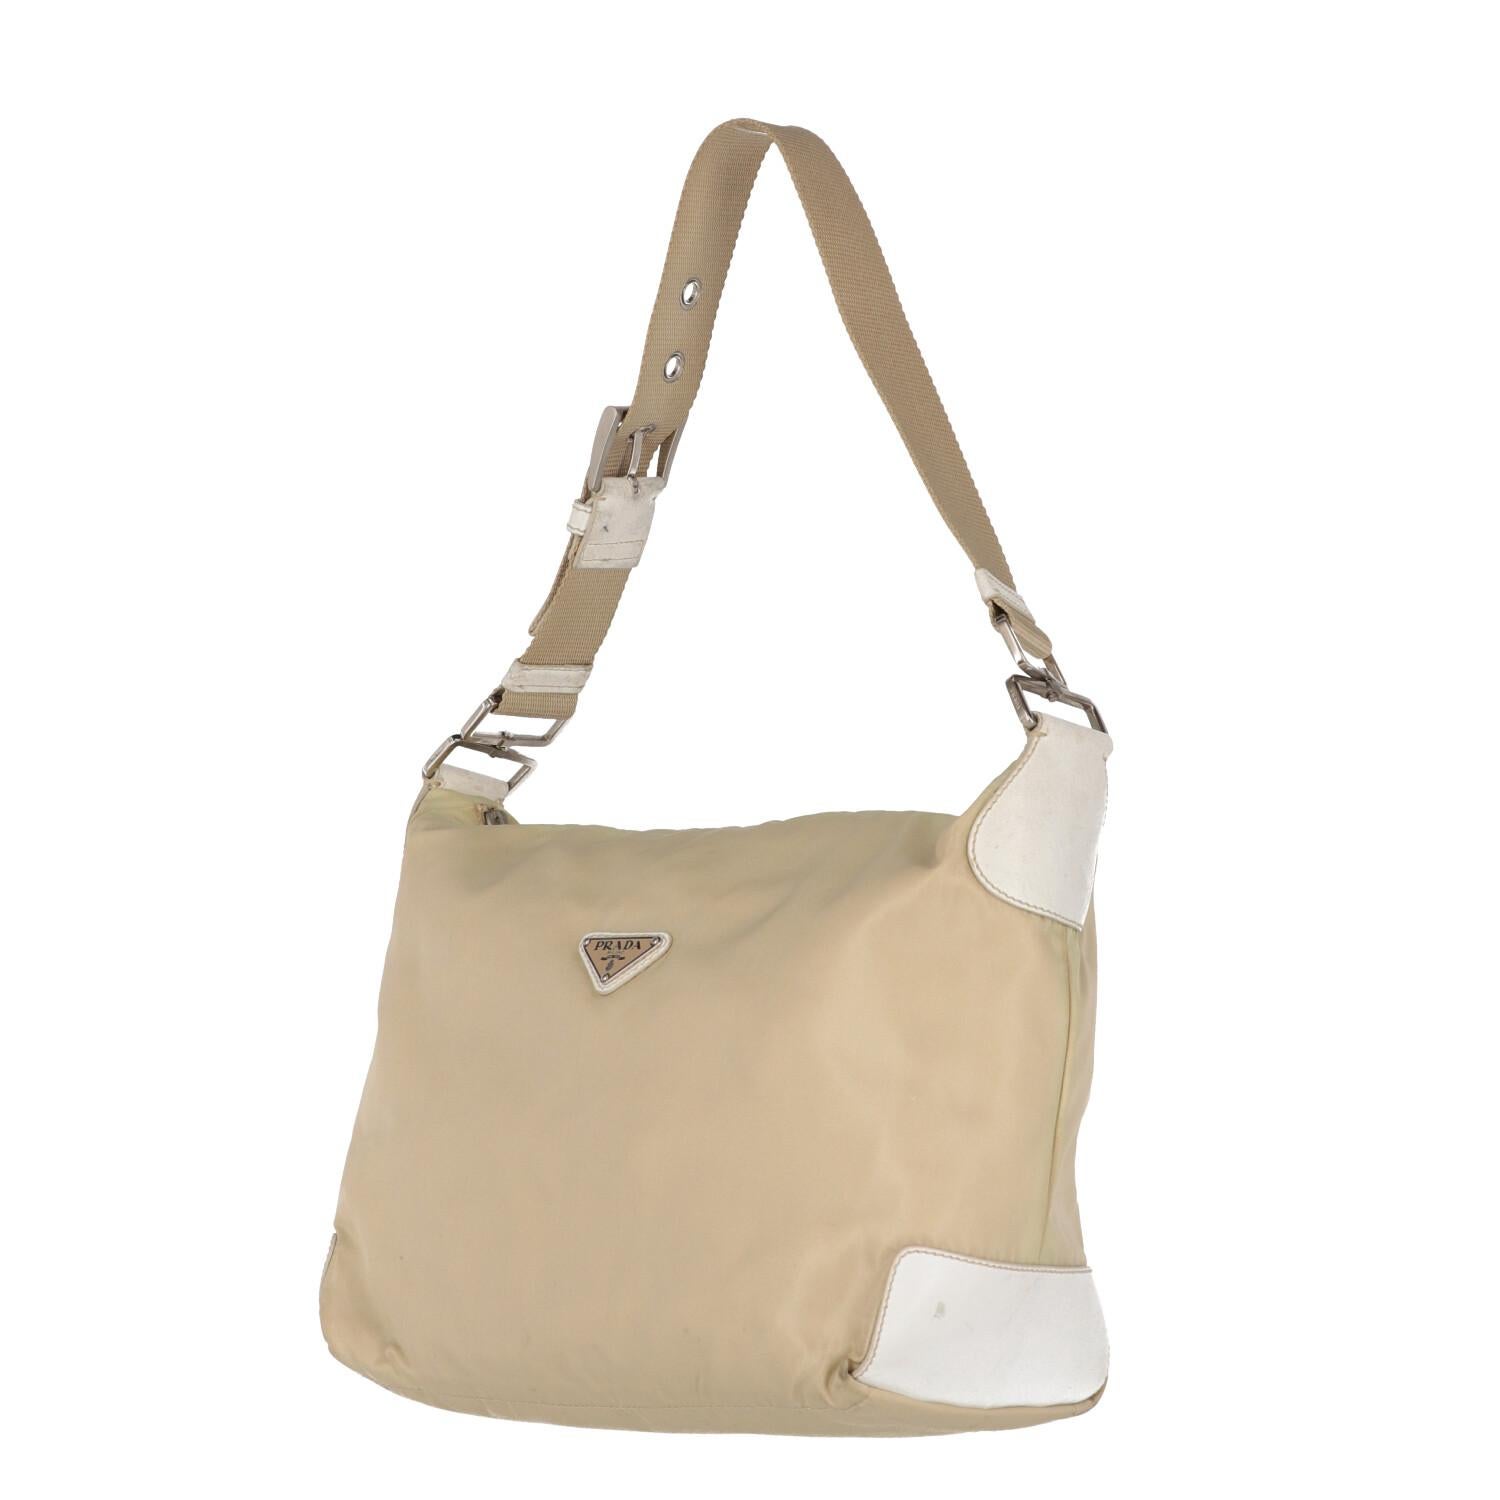 A.N.G.E.L.O. Vintage - ITALY
Prada ivory nylon bag with white eco-leather edges finishing. Cotton ribbon single handle adjustable by silver metal buckle and zip closure.

The product has slight signs of wear on the eco-leather and nylon parts, as